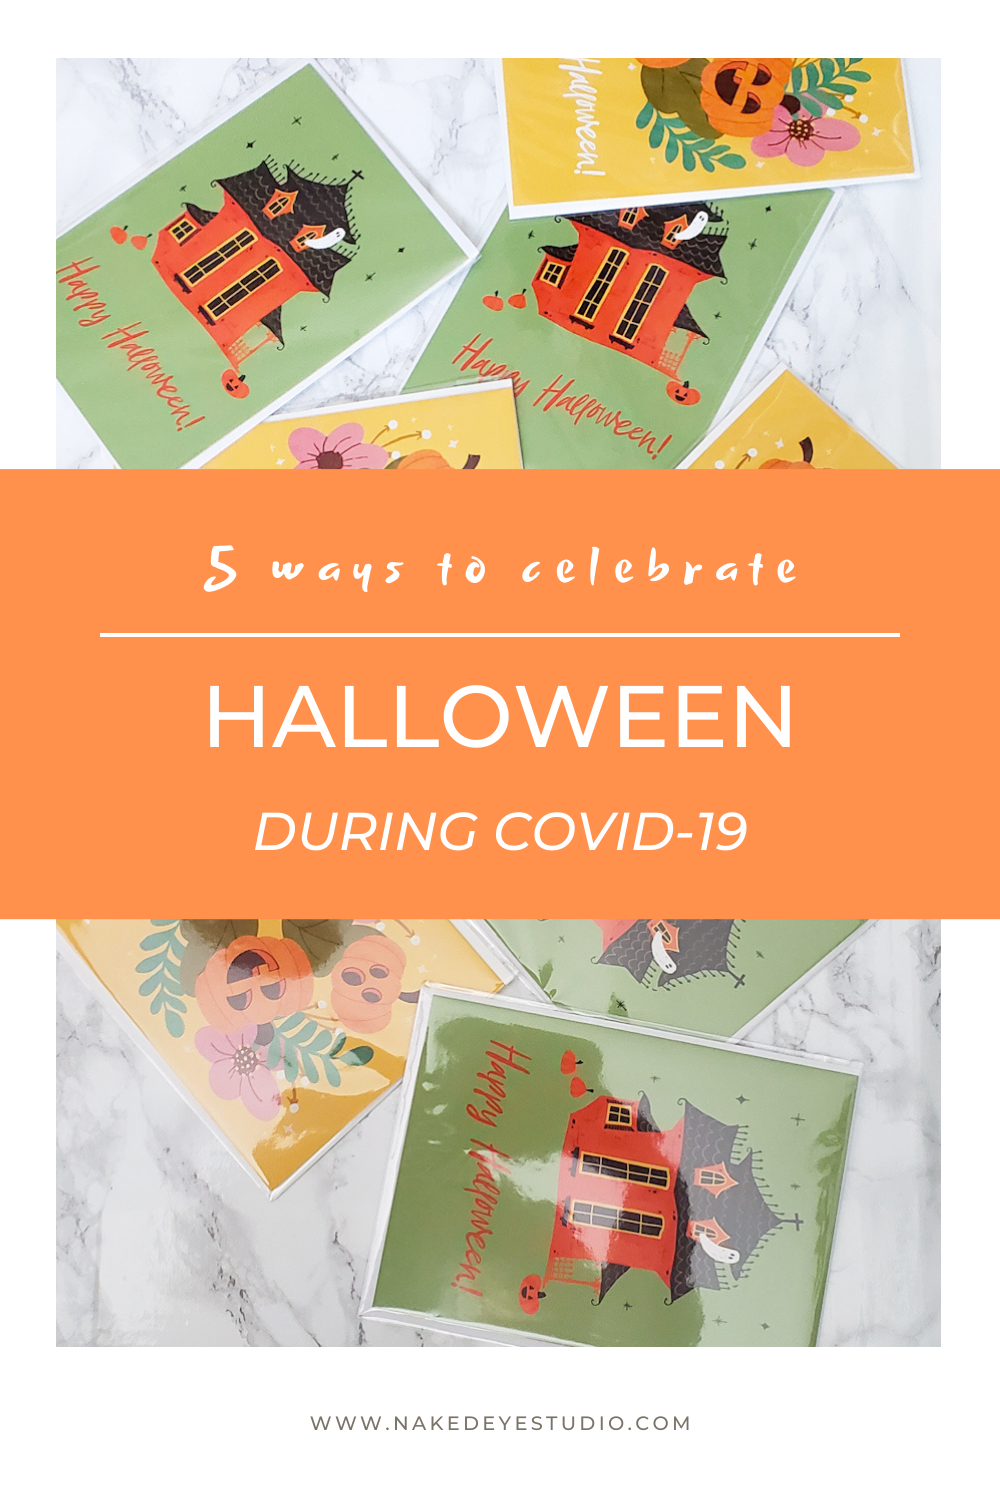 5 Ways to Celebrate Halloween During Covid